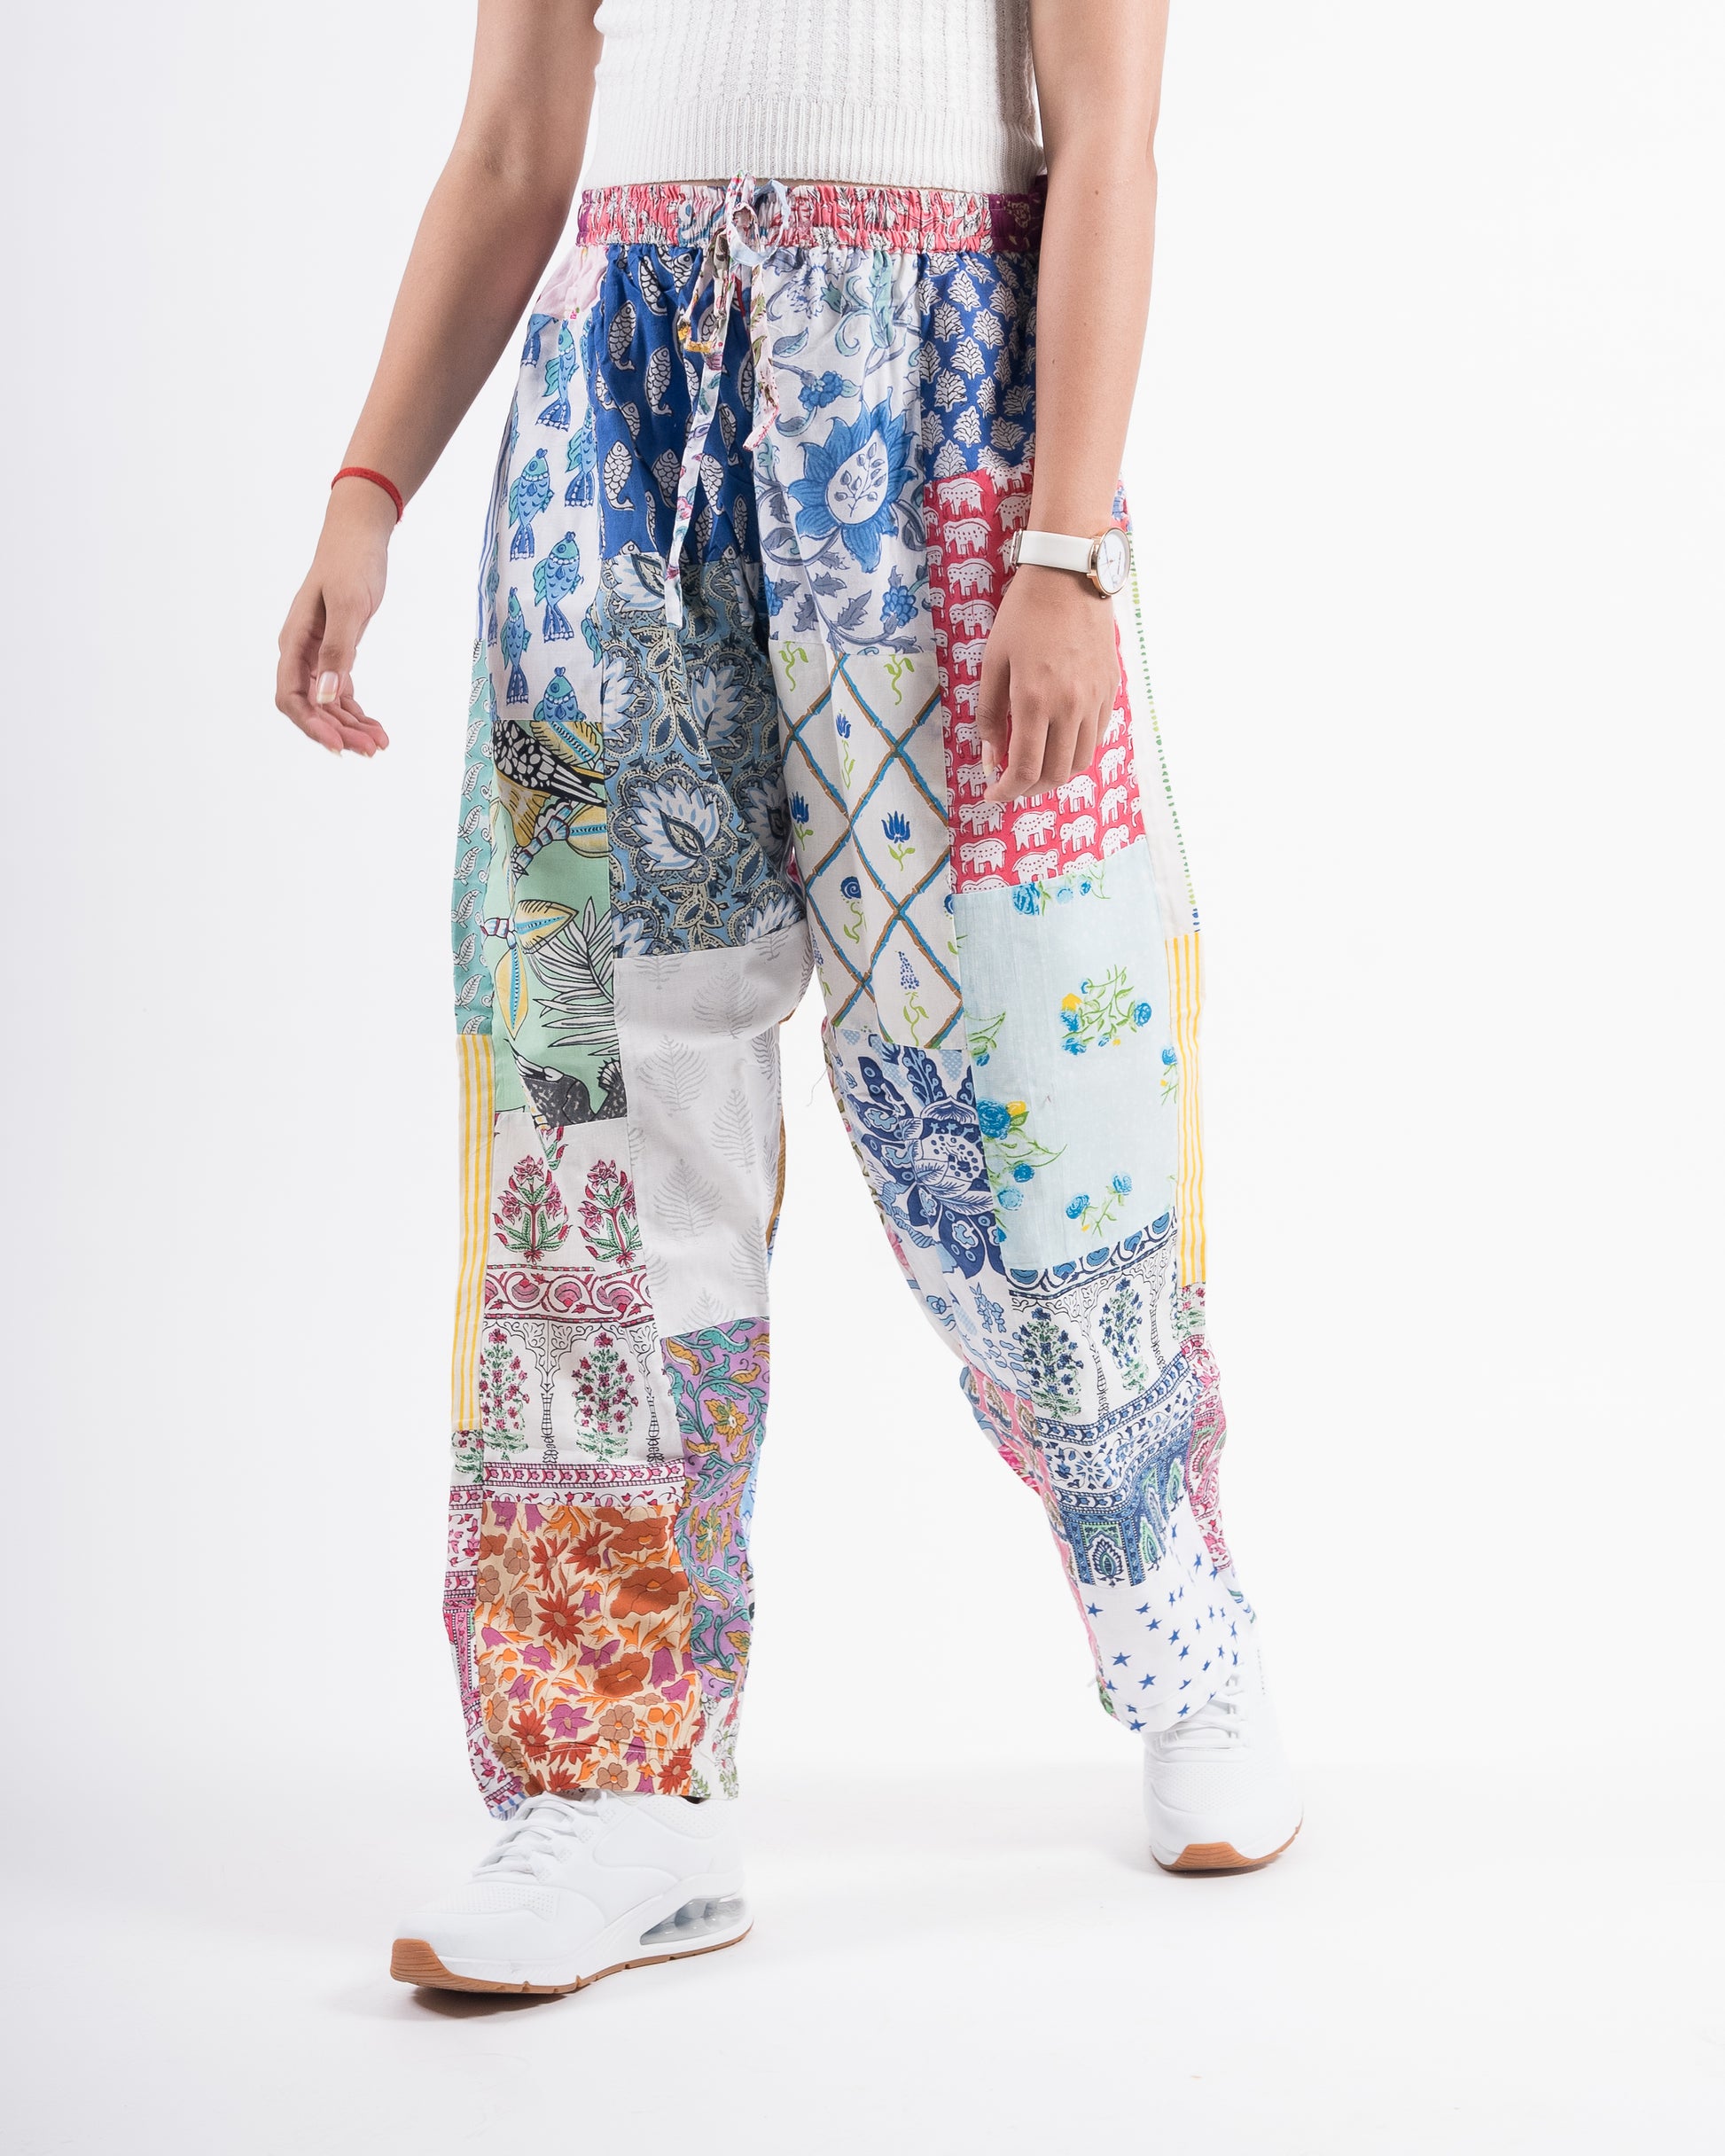 Upcycled Patchwork Pants (Large)